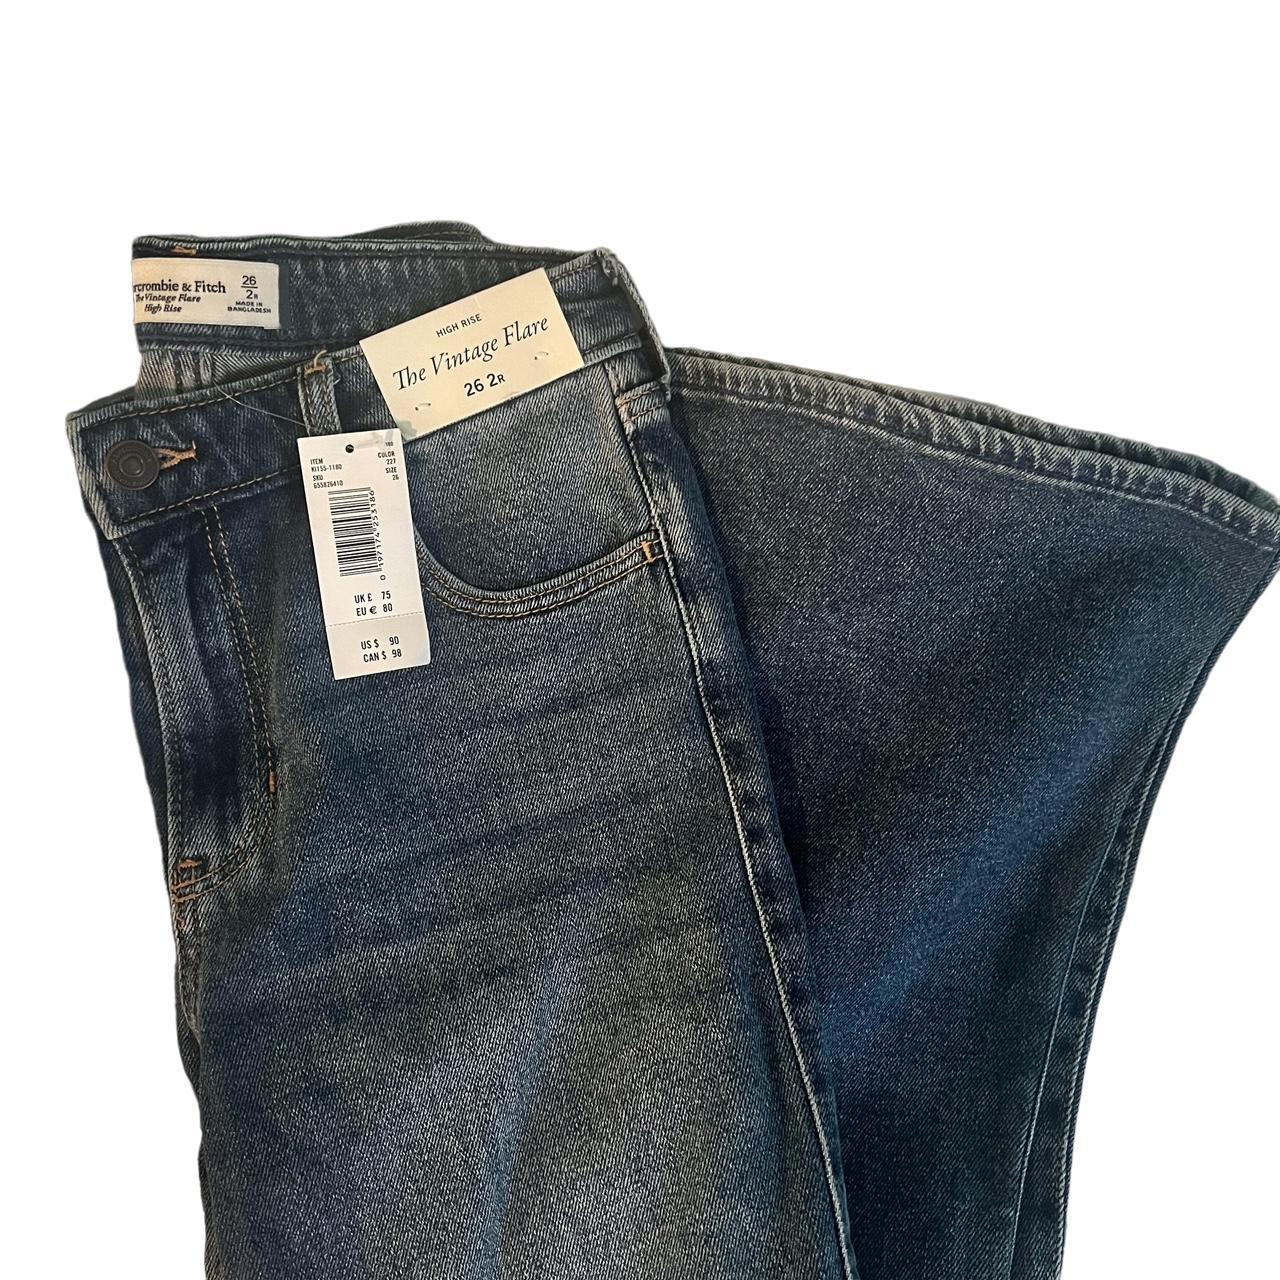 Abercrombie and Fitch The Vintage Flare jeans. Runs